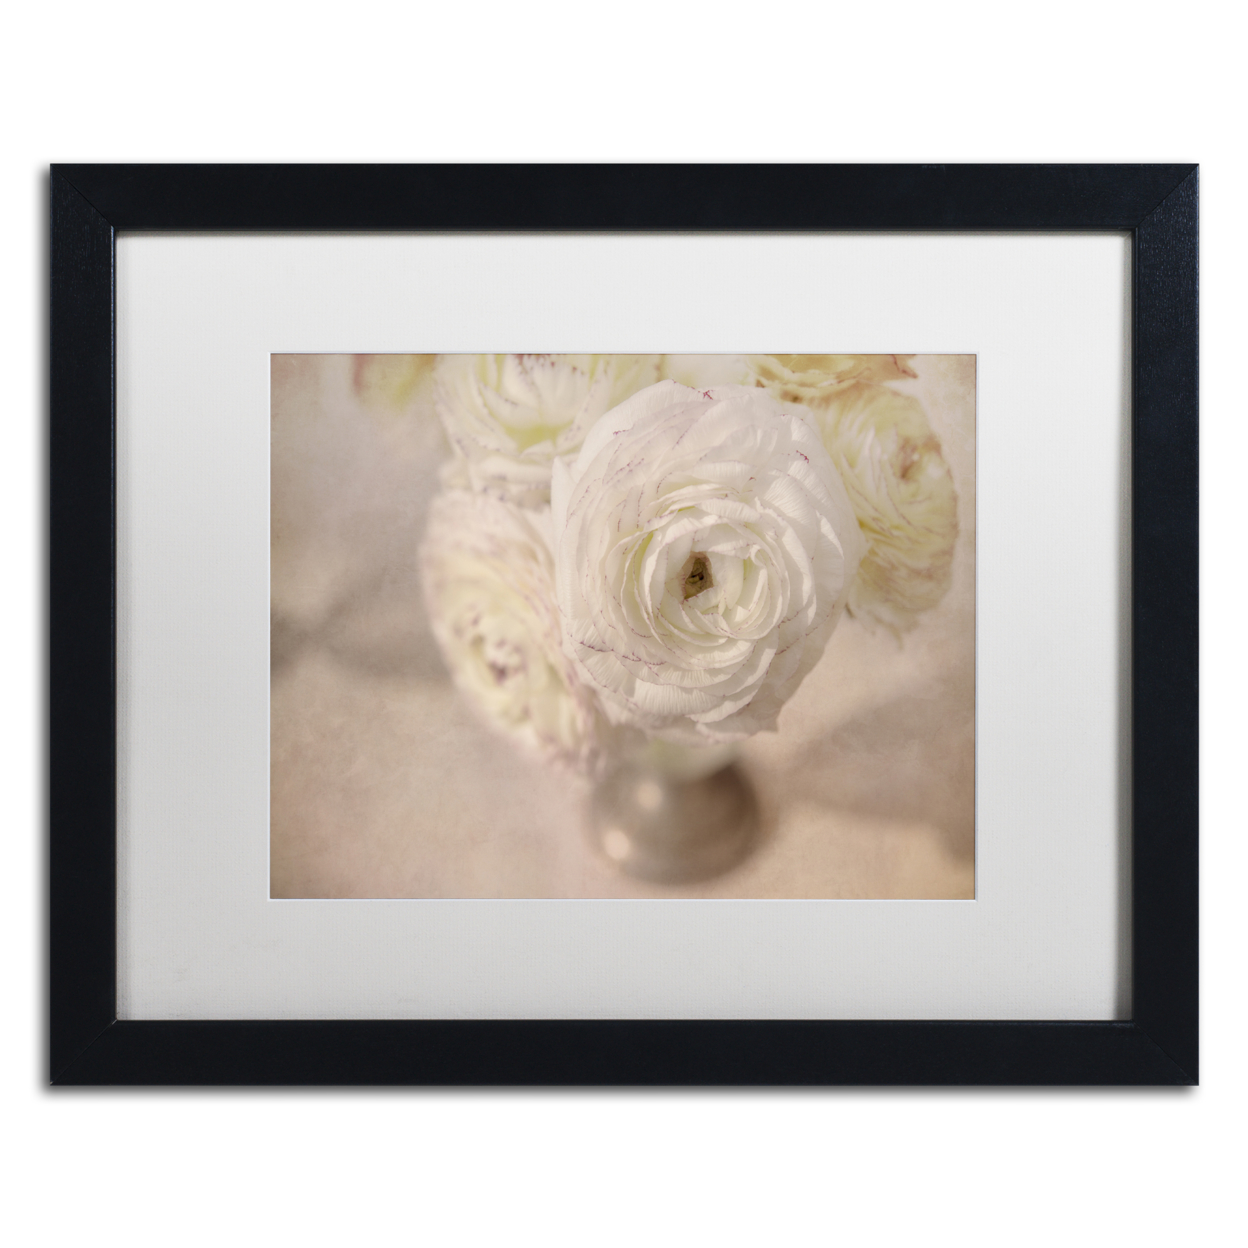 Cora Niele 'White Persian Buttercup Still Life' Black Wooden Framed Art 18 X 22 Inches